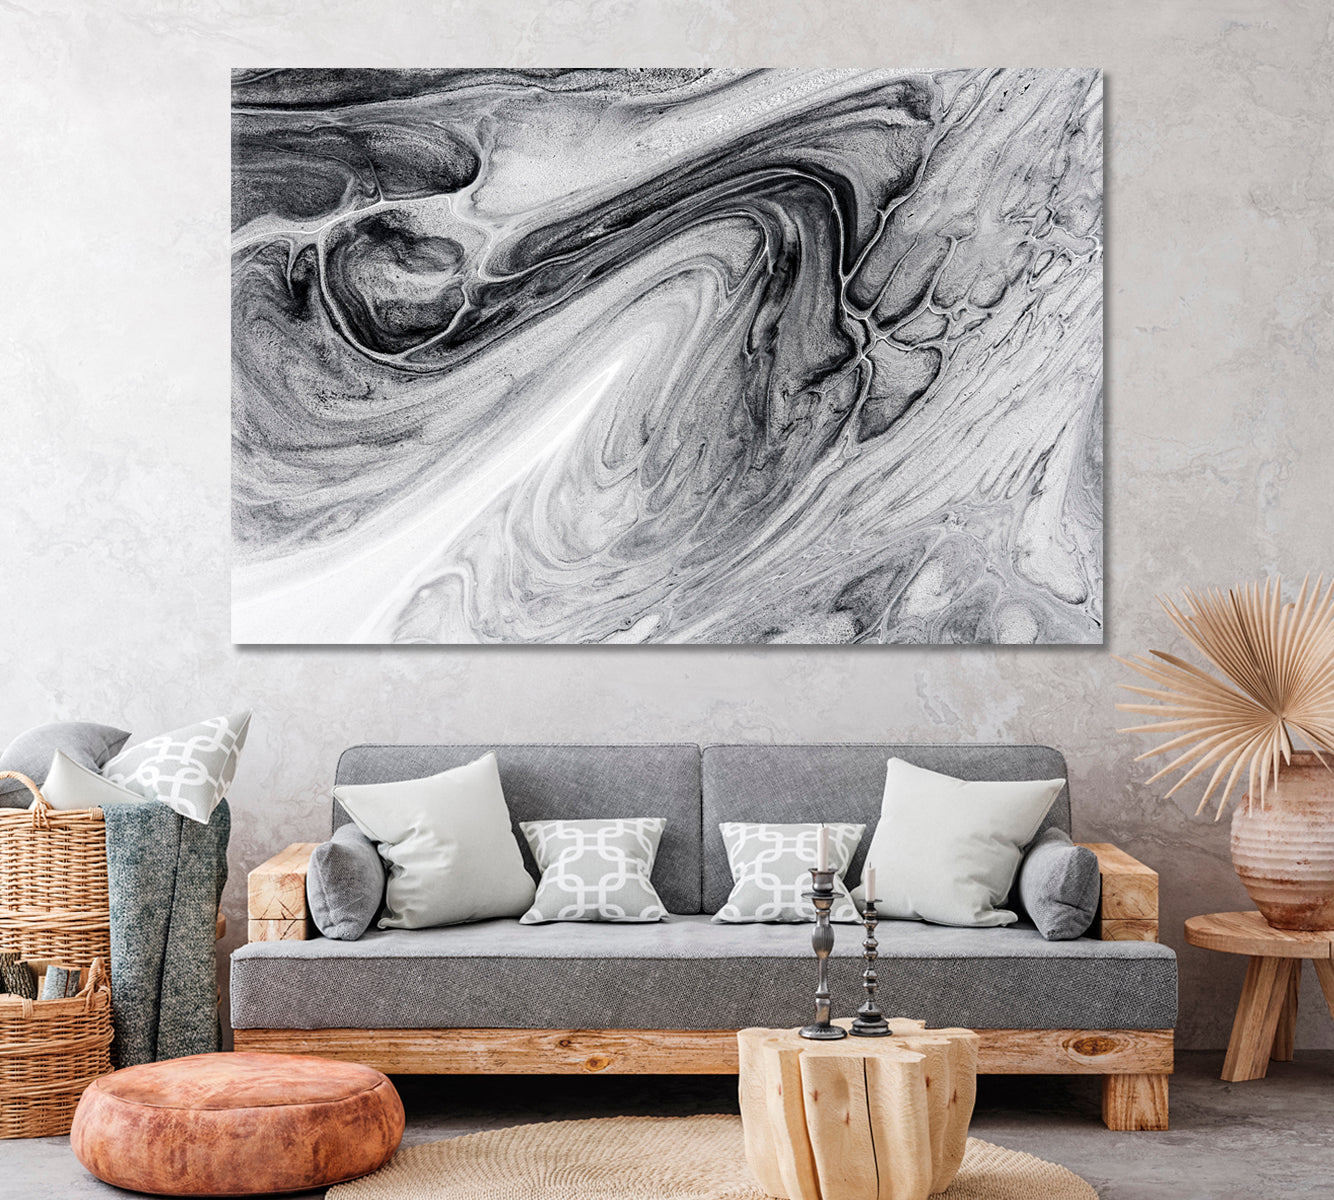 Abstract Black and White Marble Pattern Canvas Print ArtLexy 1 Panel 24"x16" inches 